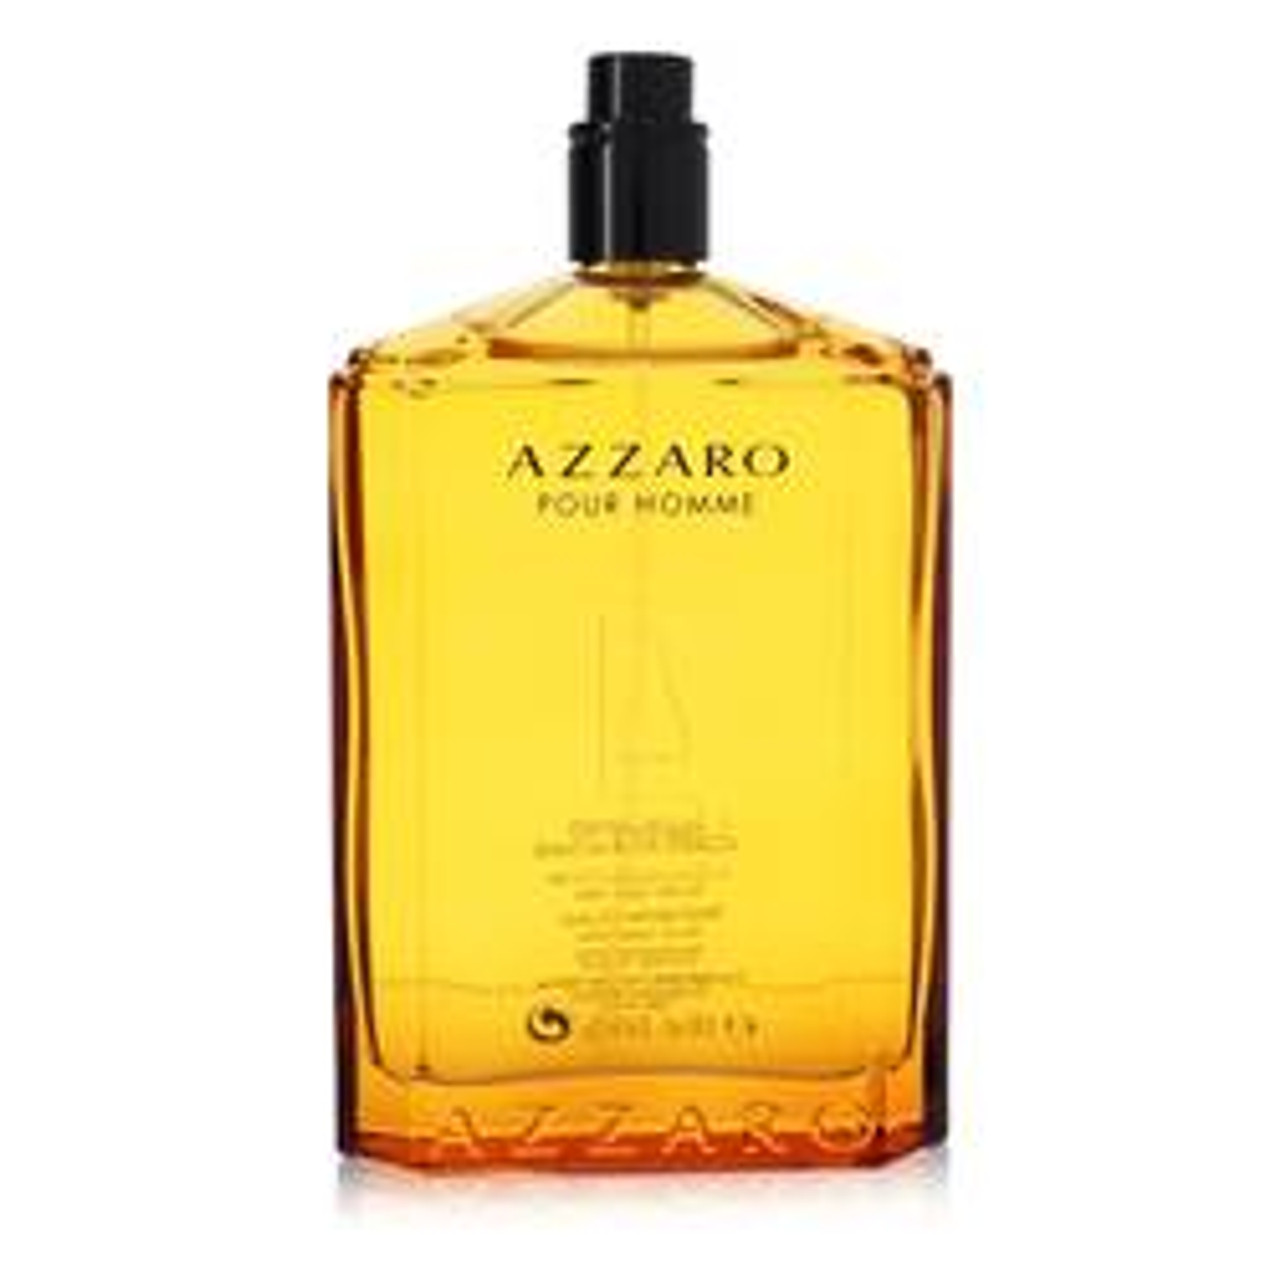 Azzaro Cologne By Azzaro Eau De Toilette Refillable Spray (Tester) 3.4 oz for Men - [From 67.00 - Choose pk Qty ] - *Ships from Miami